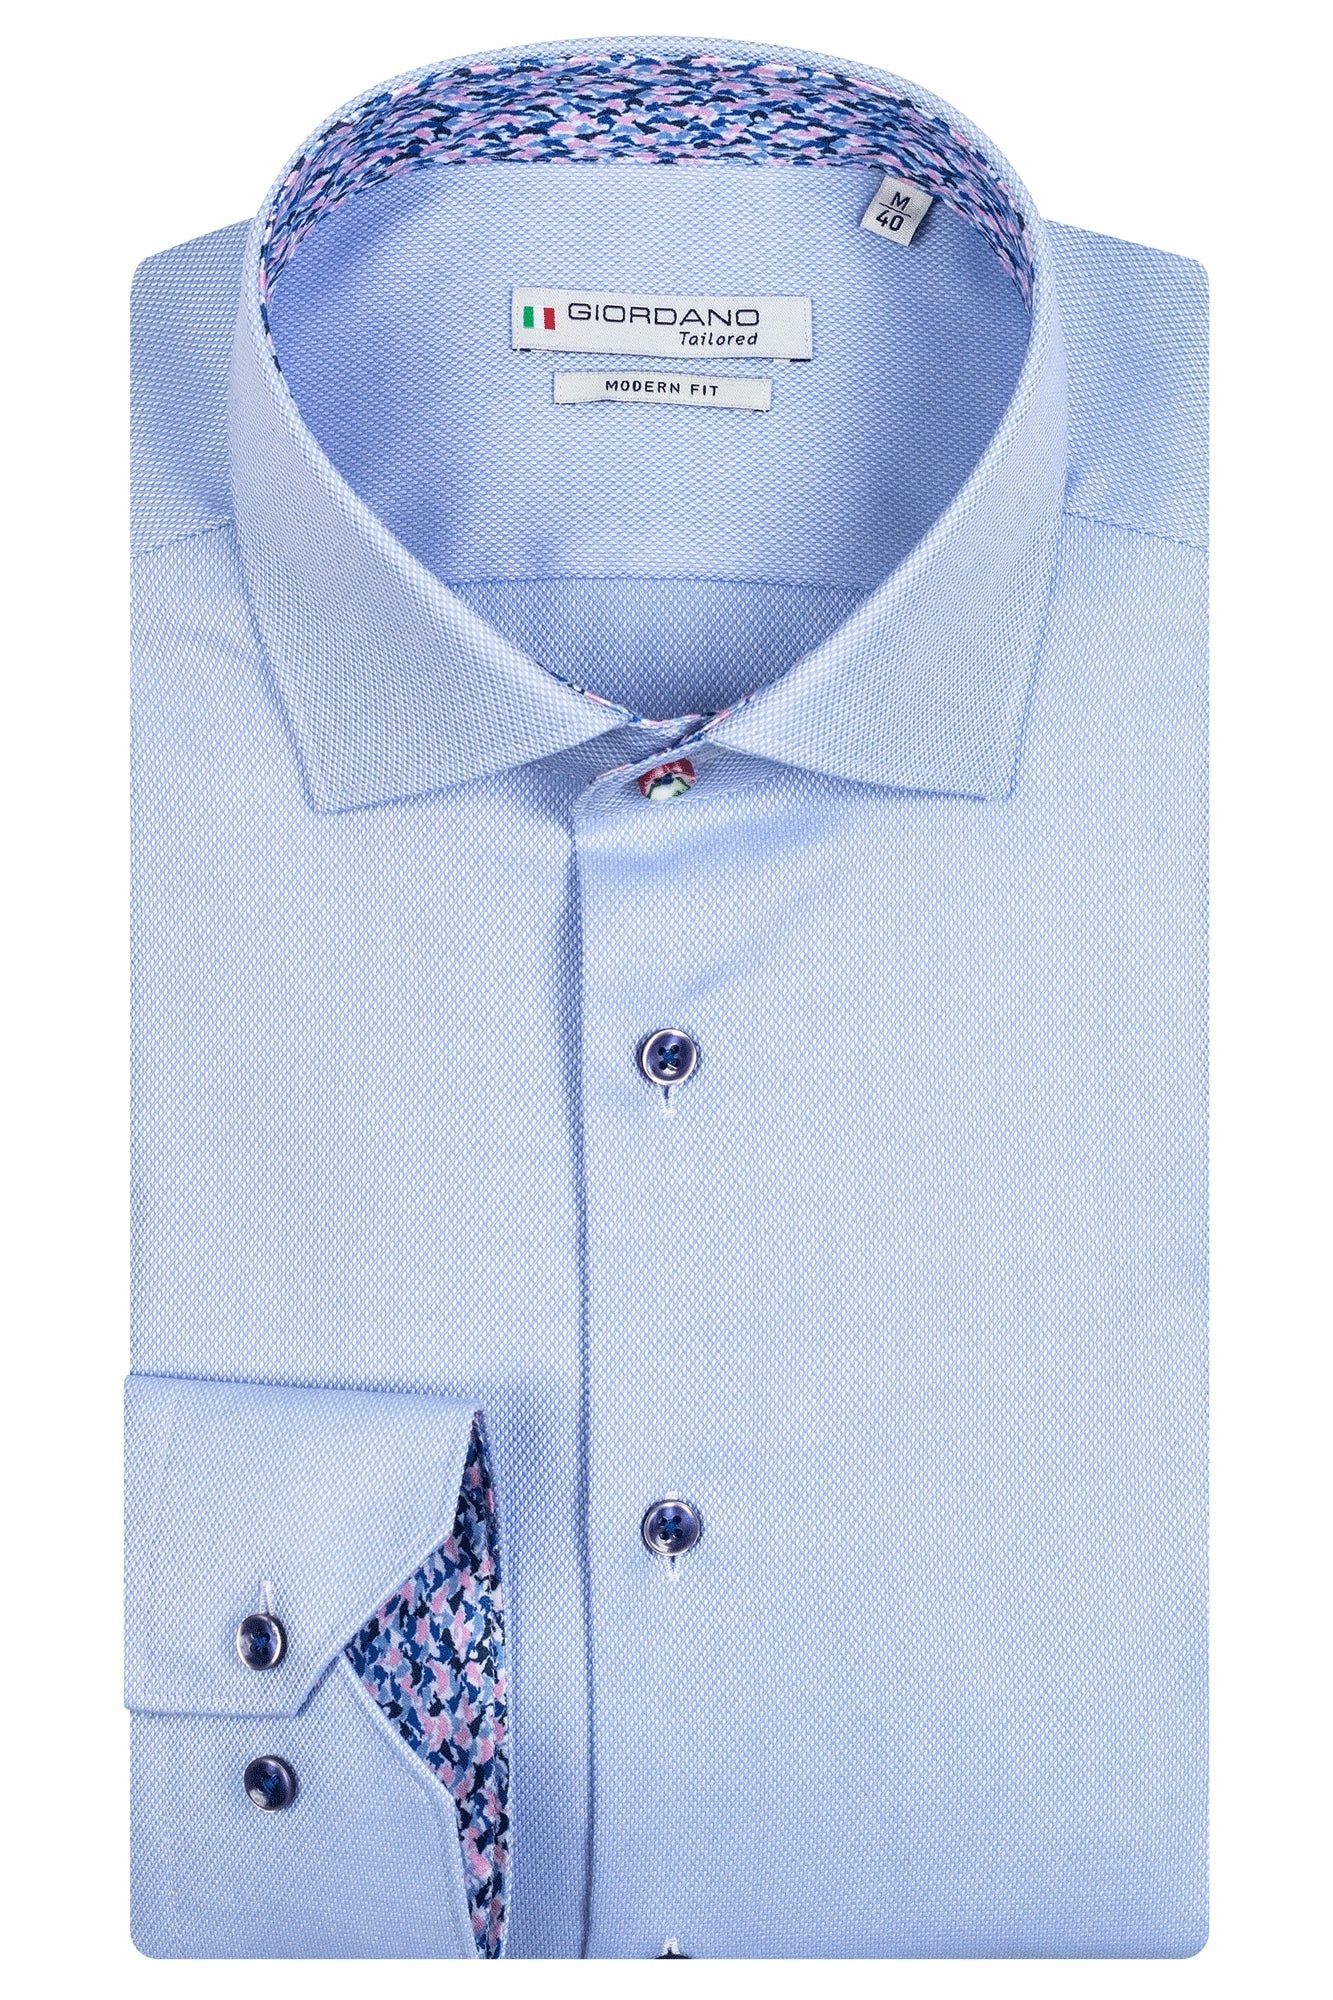 Giordano 100% cotton shirt. Light blue with navy buttons. Harringbone design. Soft pink and navy wave print lining on collar and cuff. The perfect summer light shirt. Dressed casually not tucked in, or more formal tucked in. Great paired with jeans and chinos but also shorts.